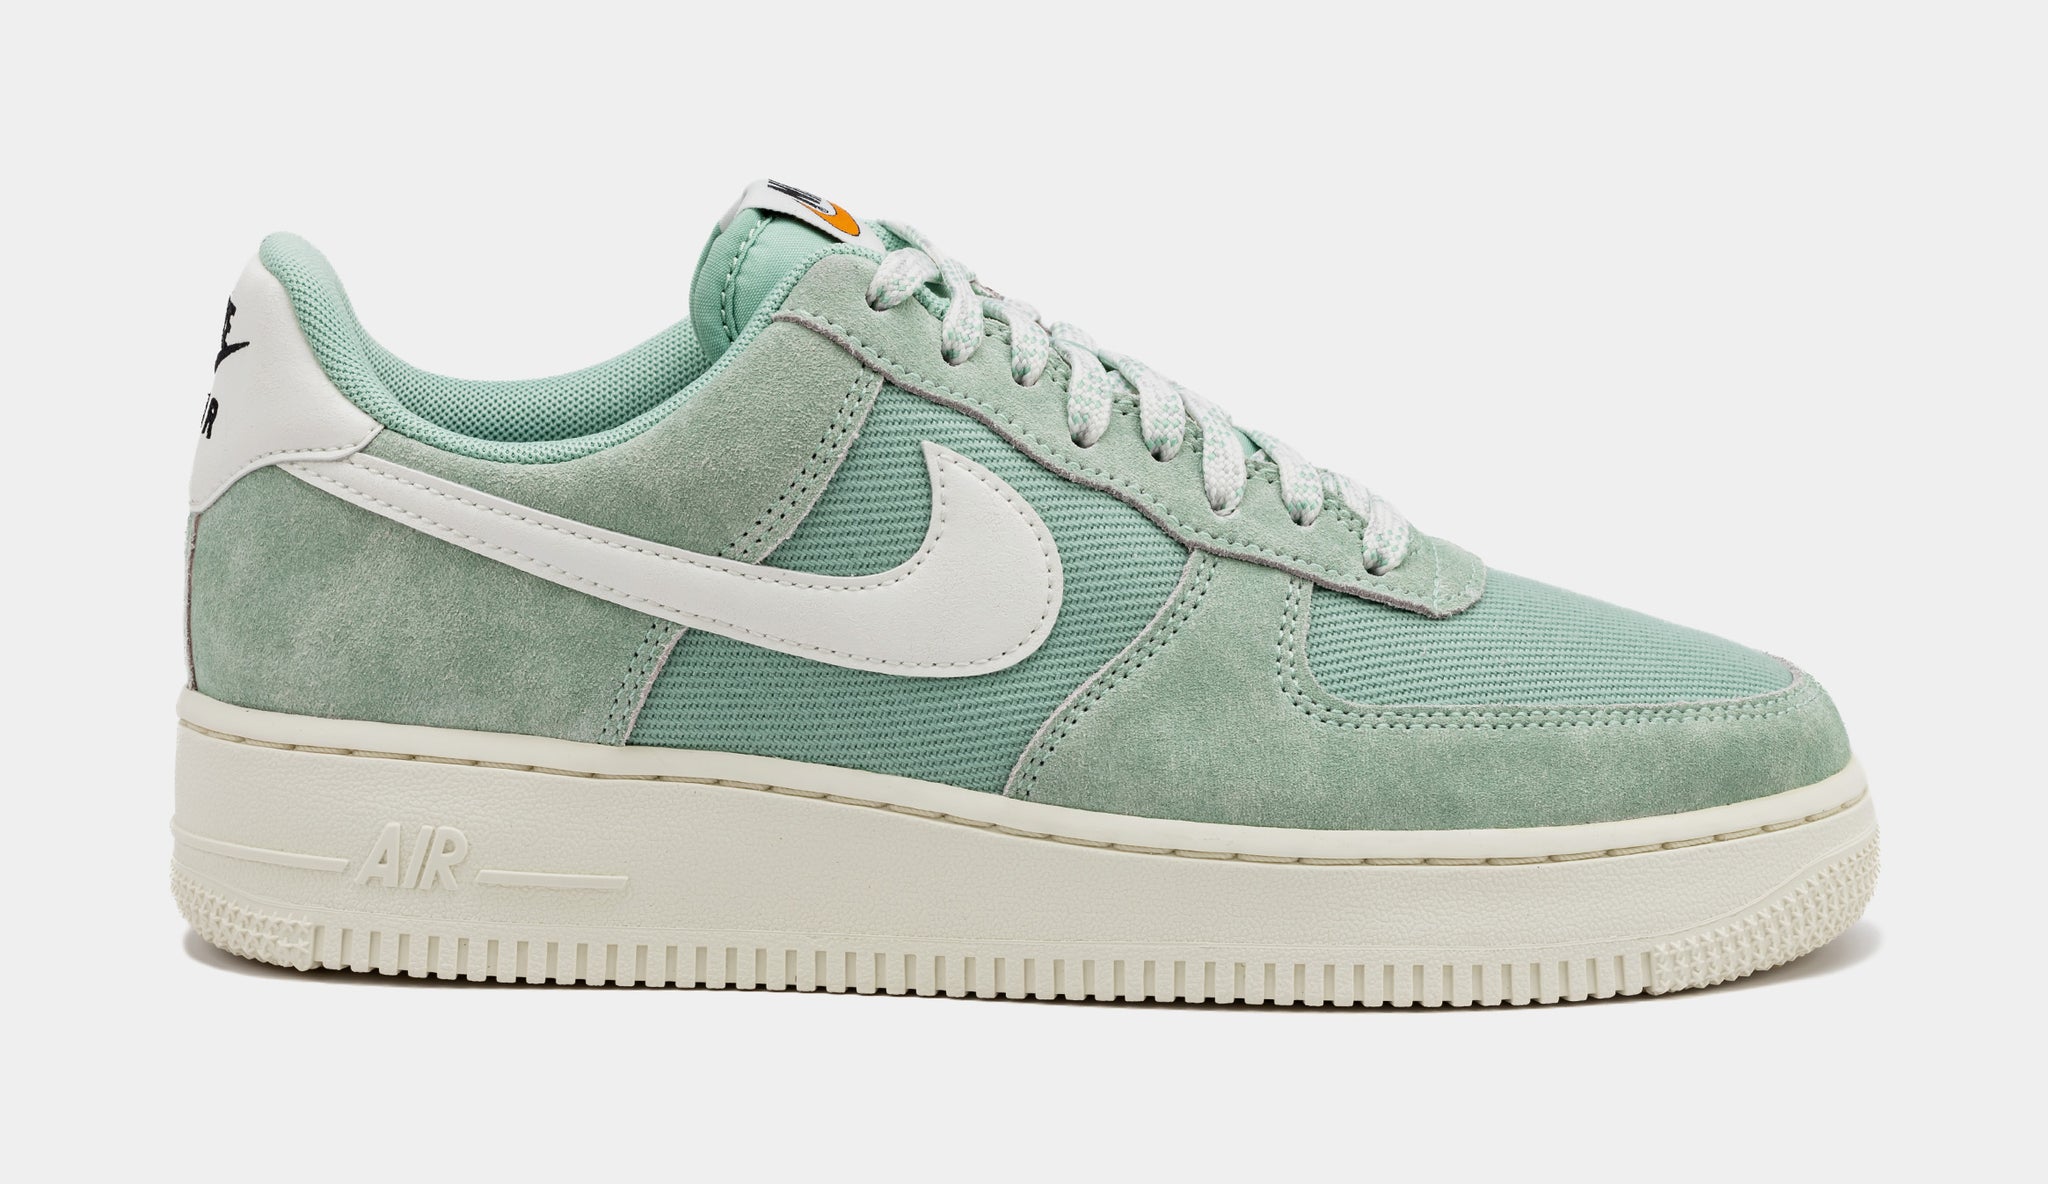 Nike Air Force 1 '07 LV8 in Green - Size 12